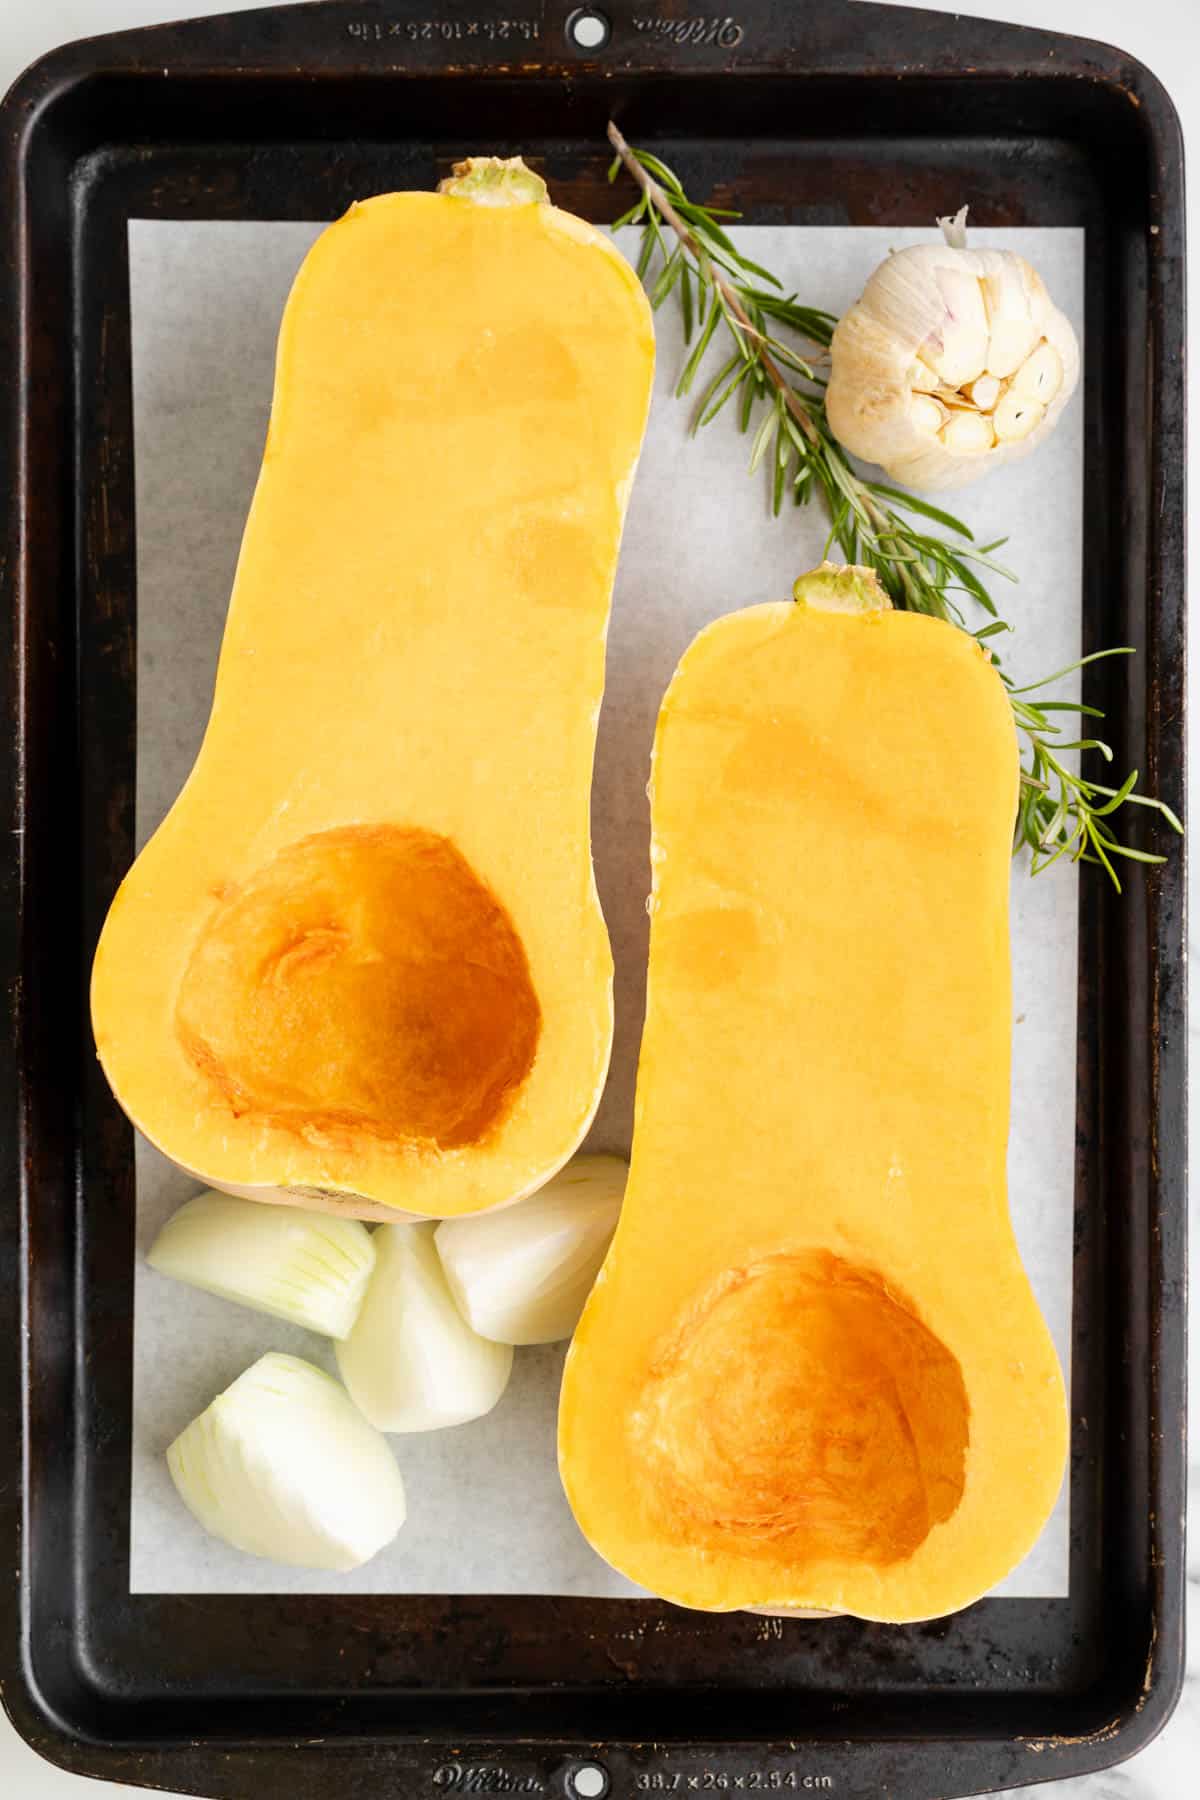 A butternut squash that has been cut in half on a pan with onion, garlic, and rosemary.